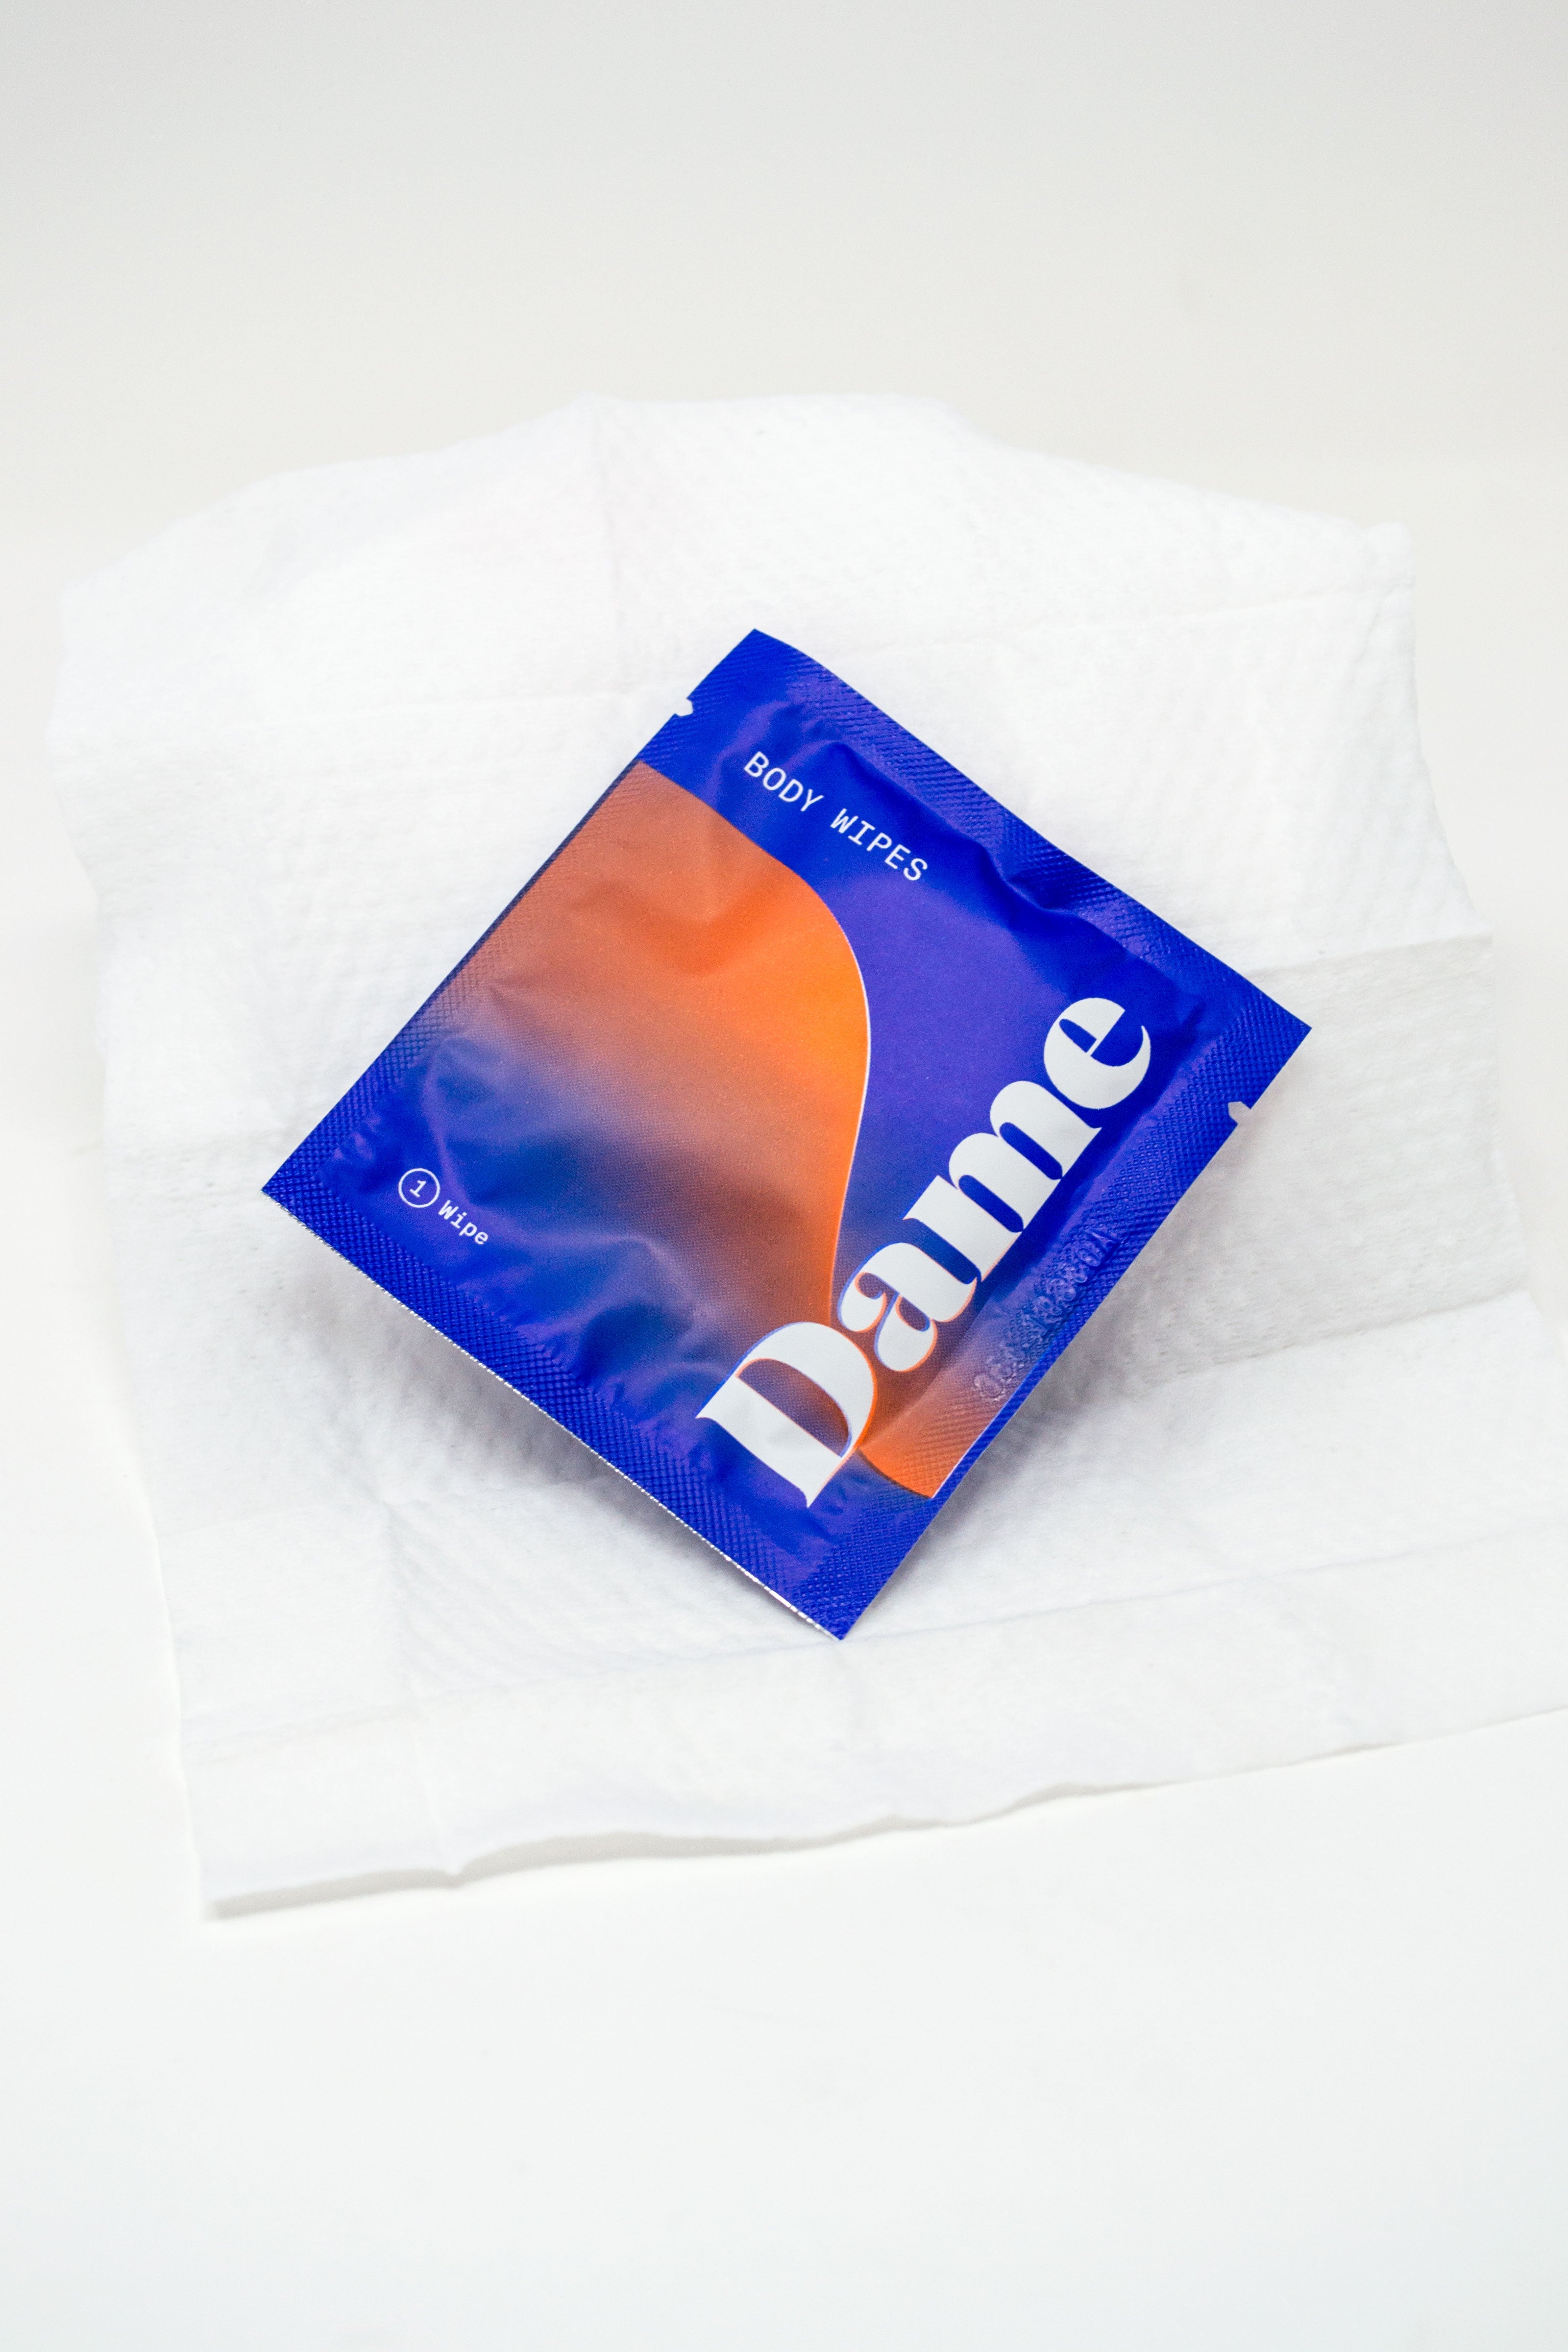 Dame Body Wipes Sachets 15 Count-Accessories / Miscellaneous-Dame-XOXTOYS